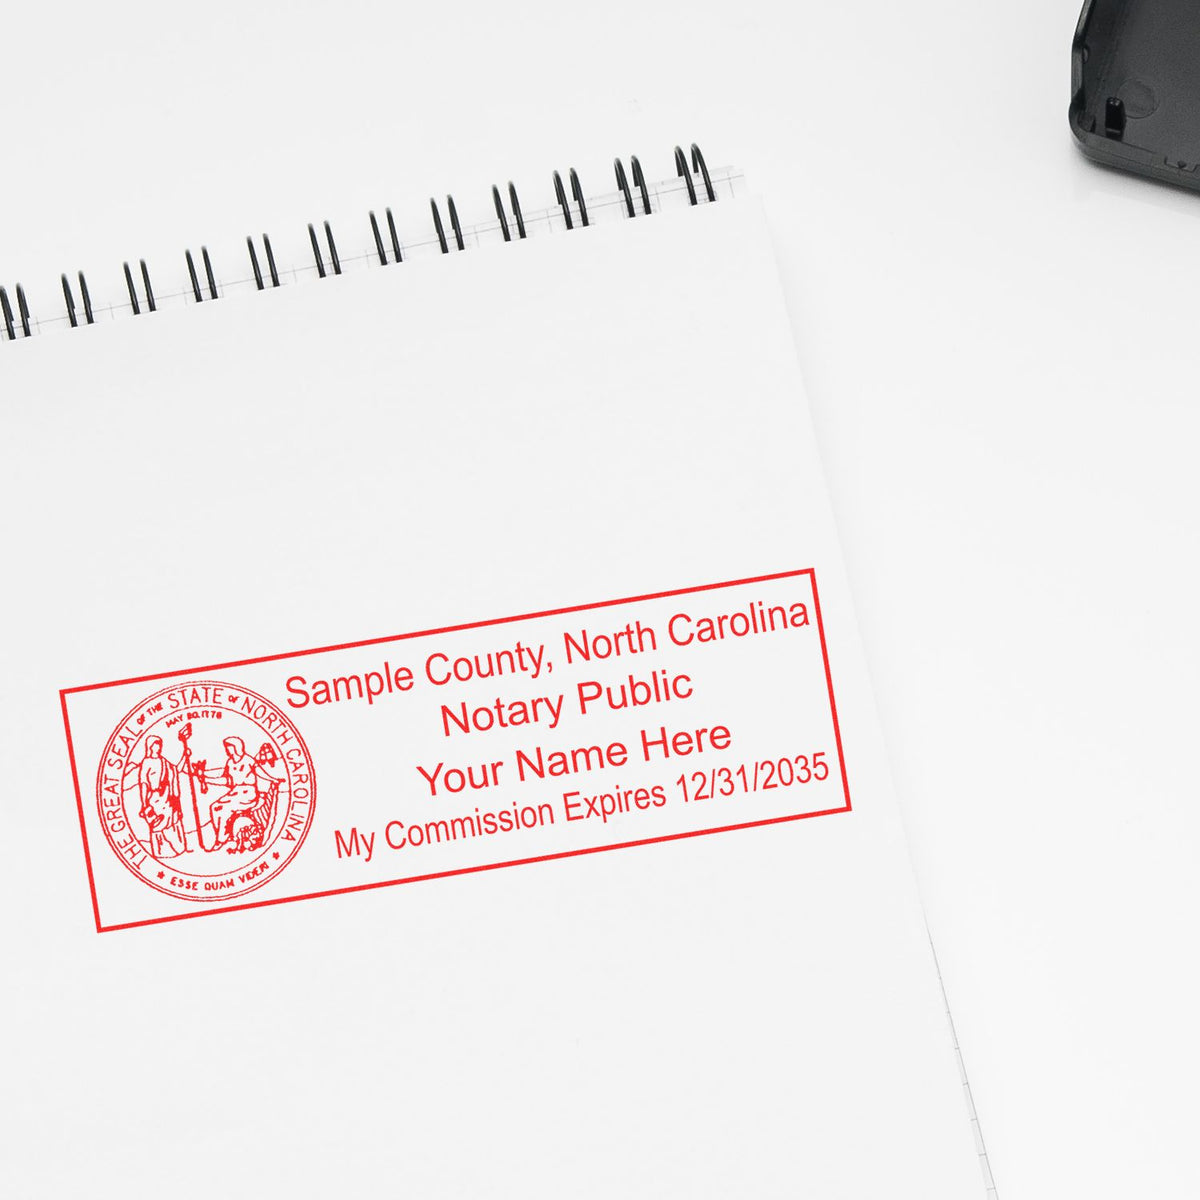 The Heavy-Duty North Carolina Rectangular Notary Stamp stamp impression comes to life with a crisp, detailed photo on paper - showcasing true professional quality.